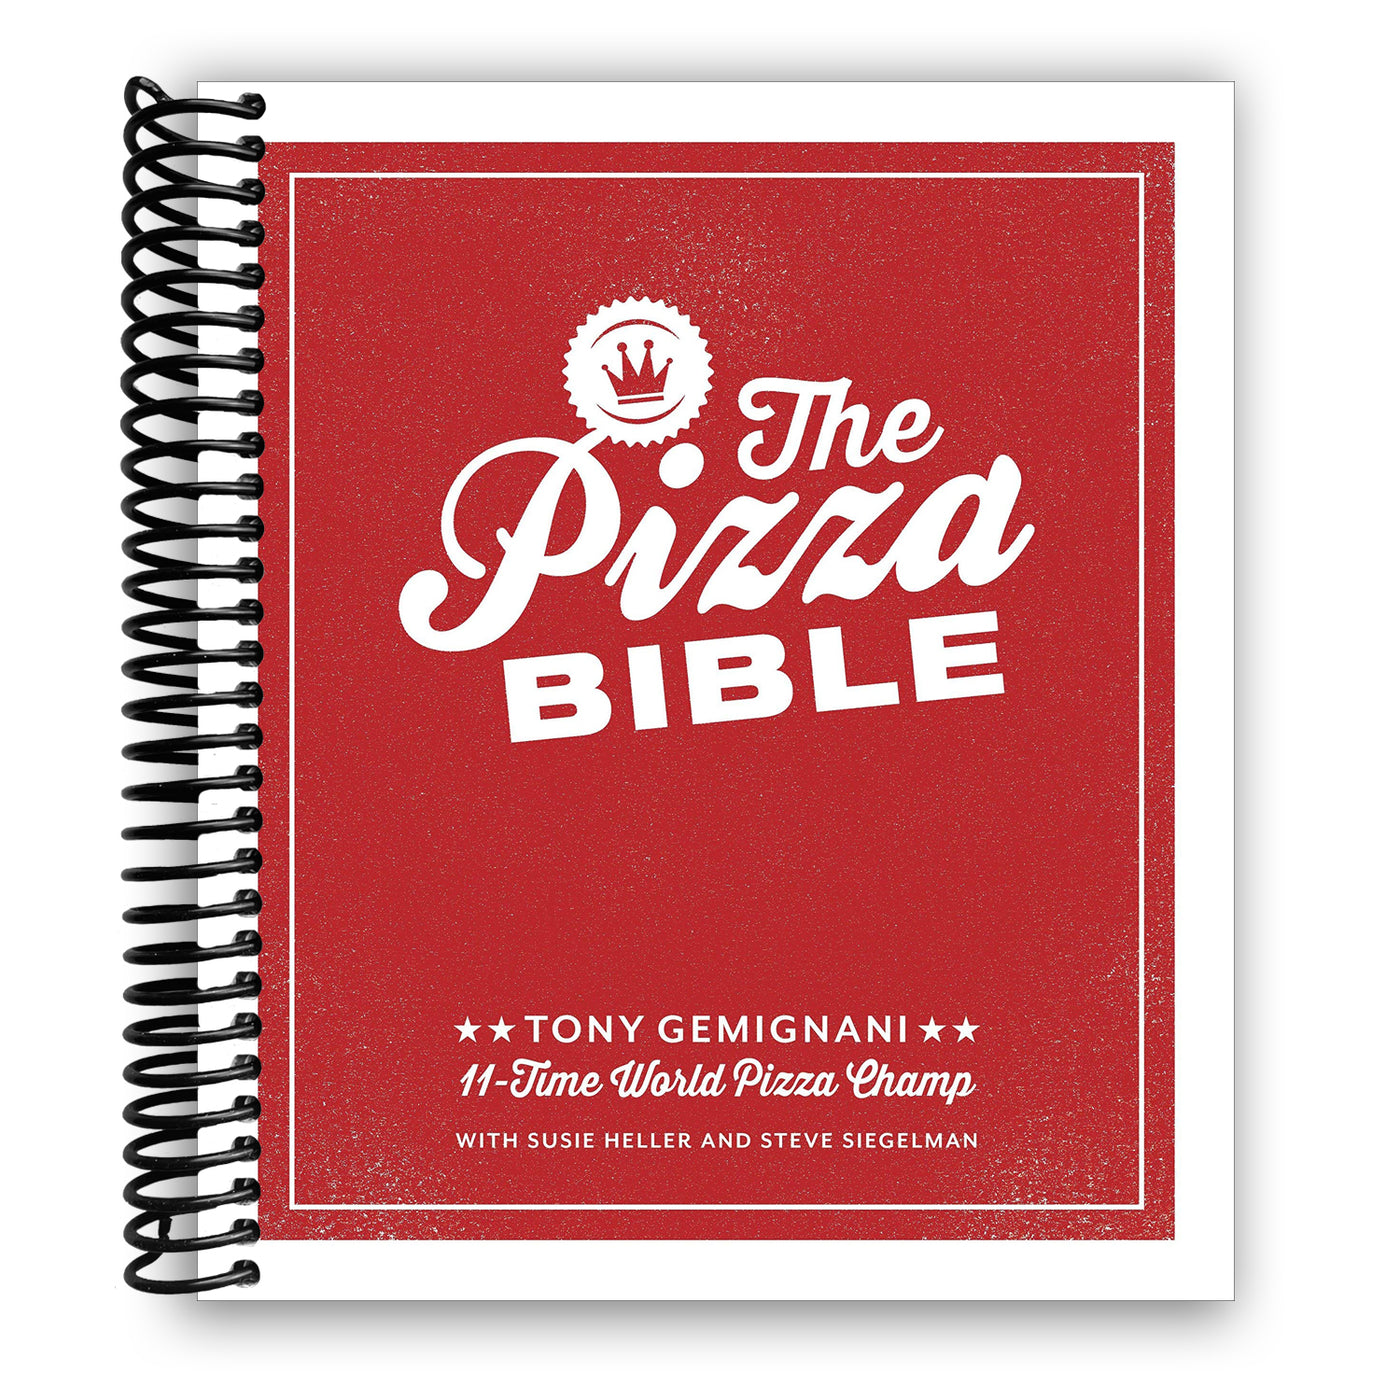 The Pizza Bible: The World's Favorite Pizza Styles (Spiral Bound)